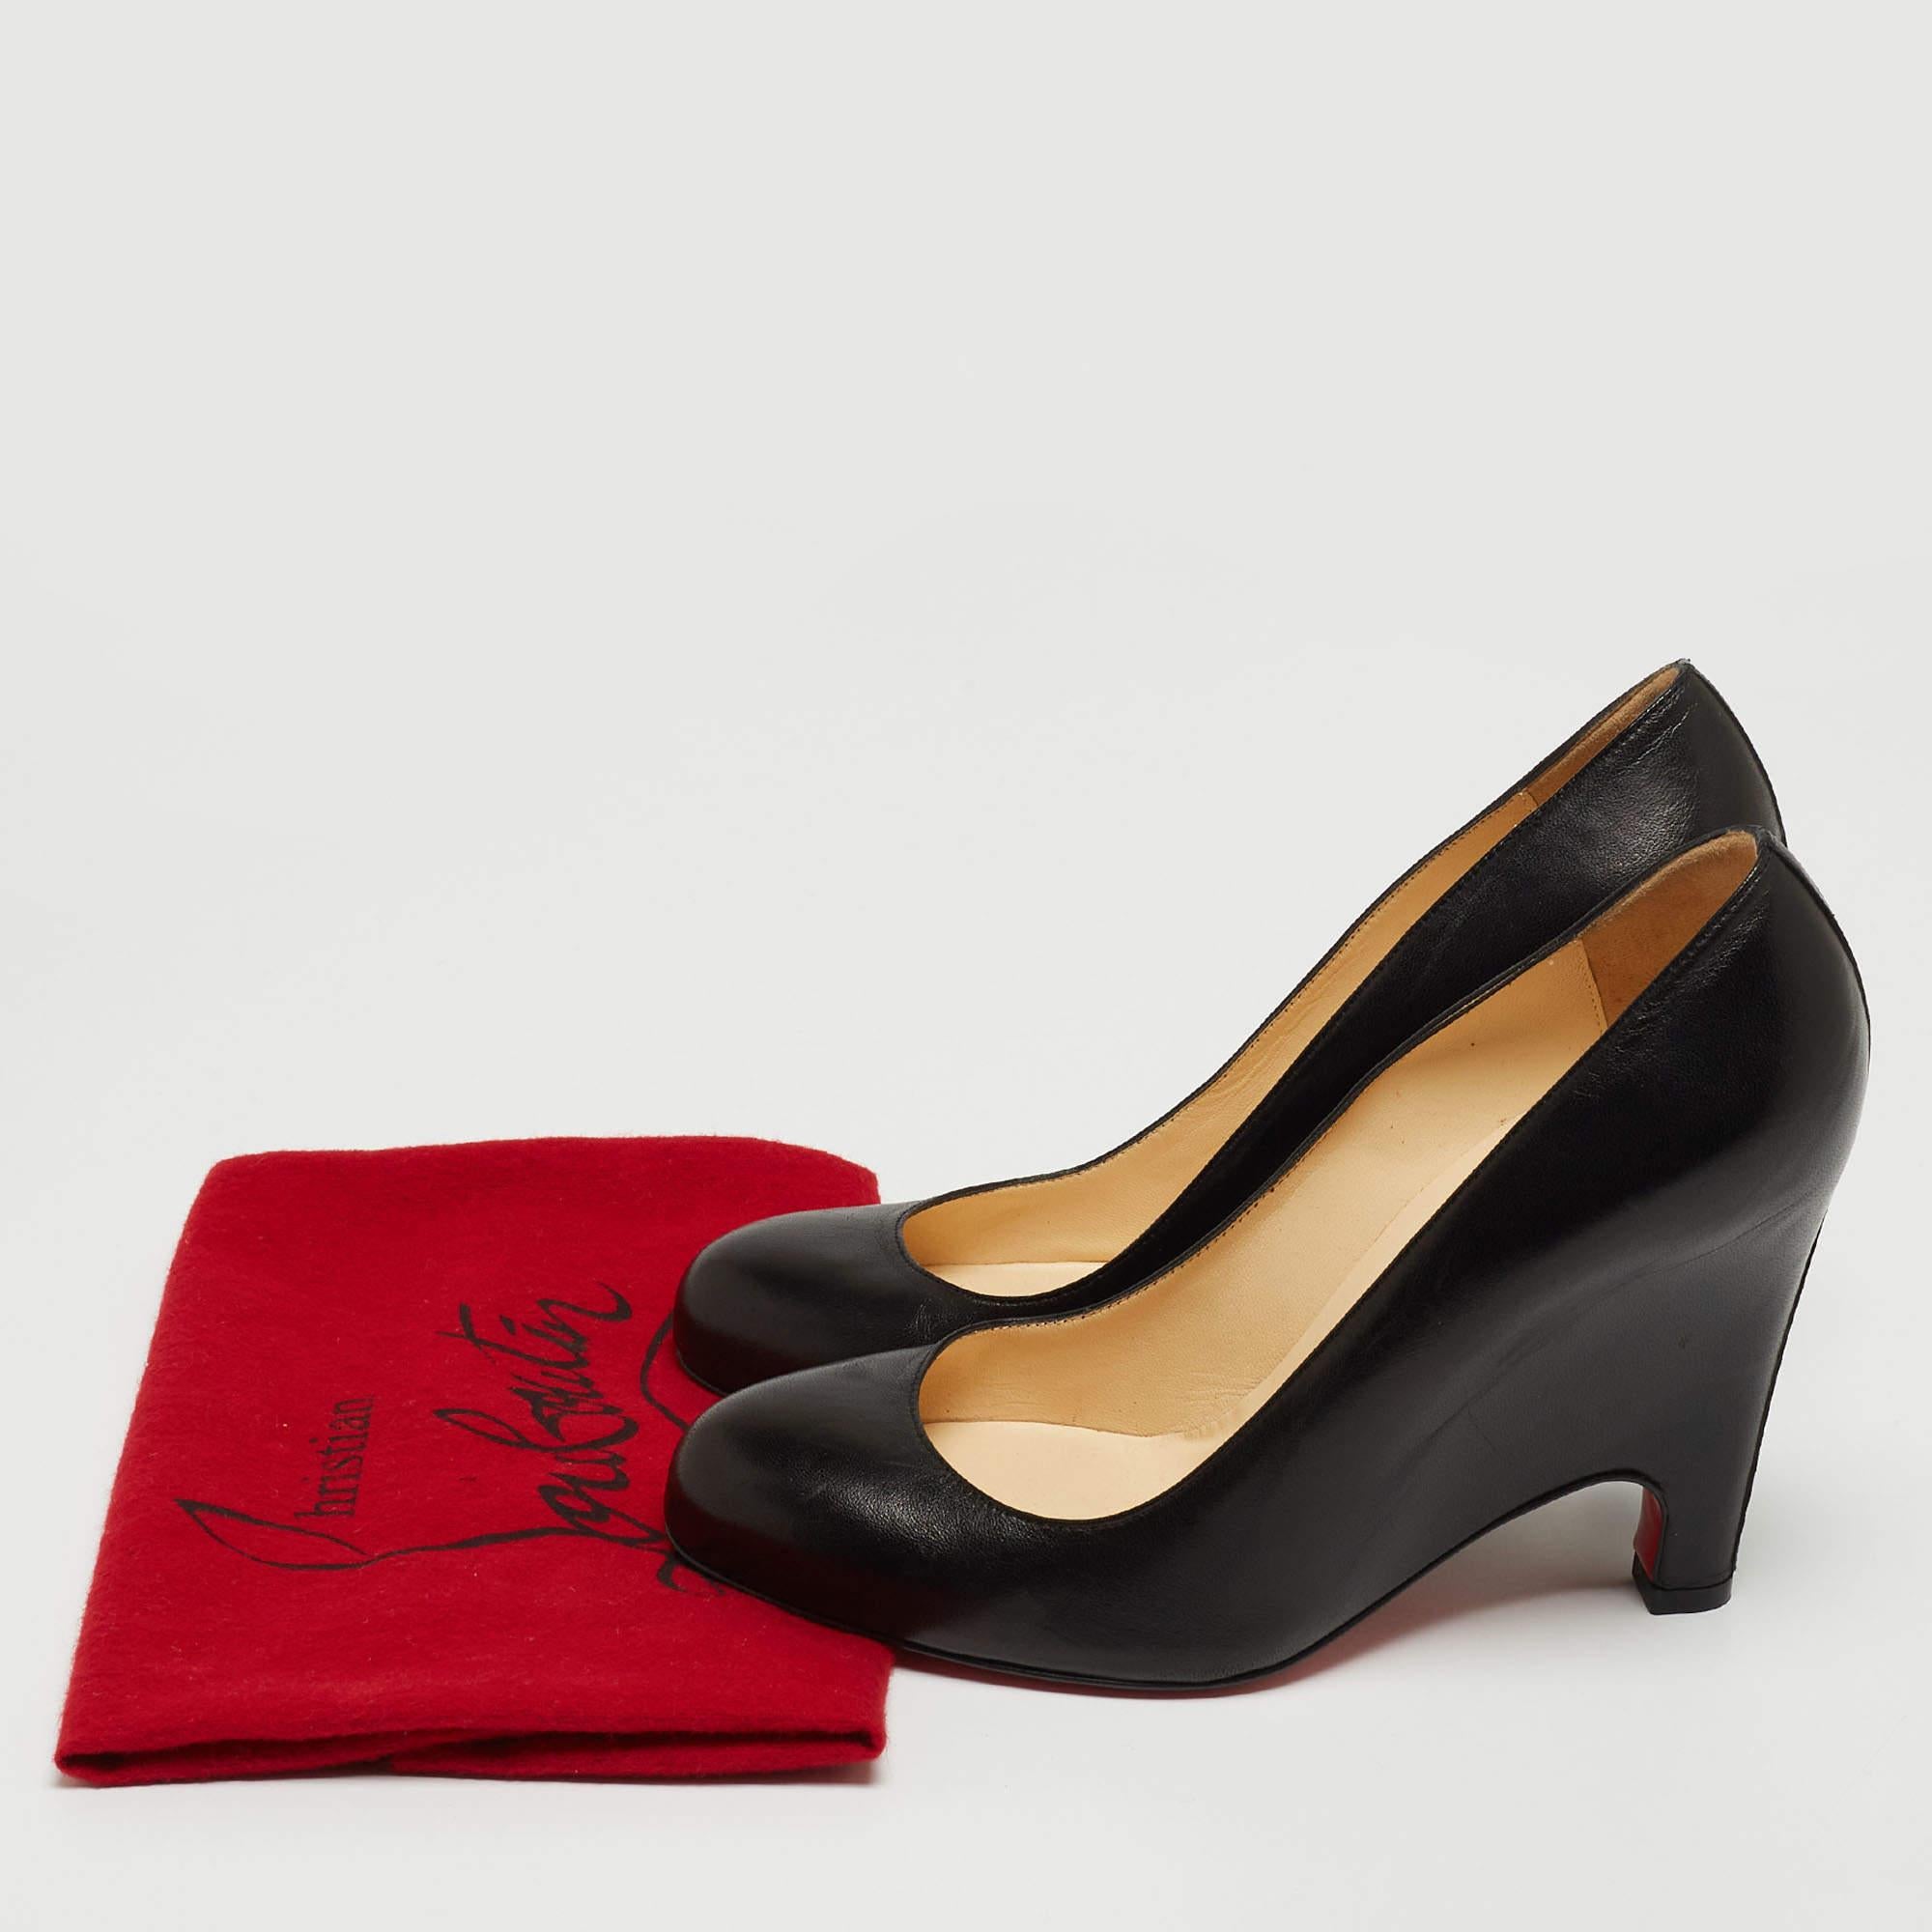 Christian Louboutin Black Leather Simple Wedge Pumps Size 38.5 For Sale 2